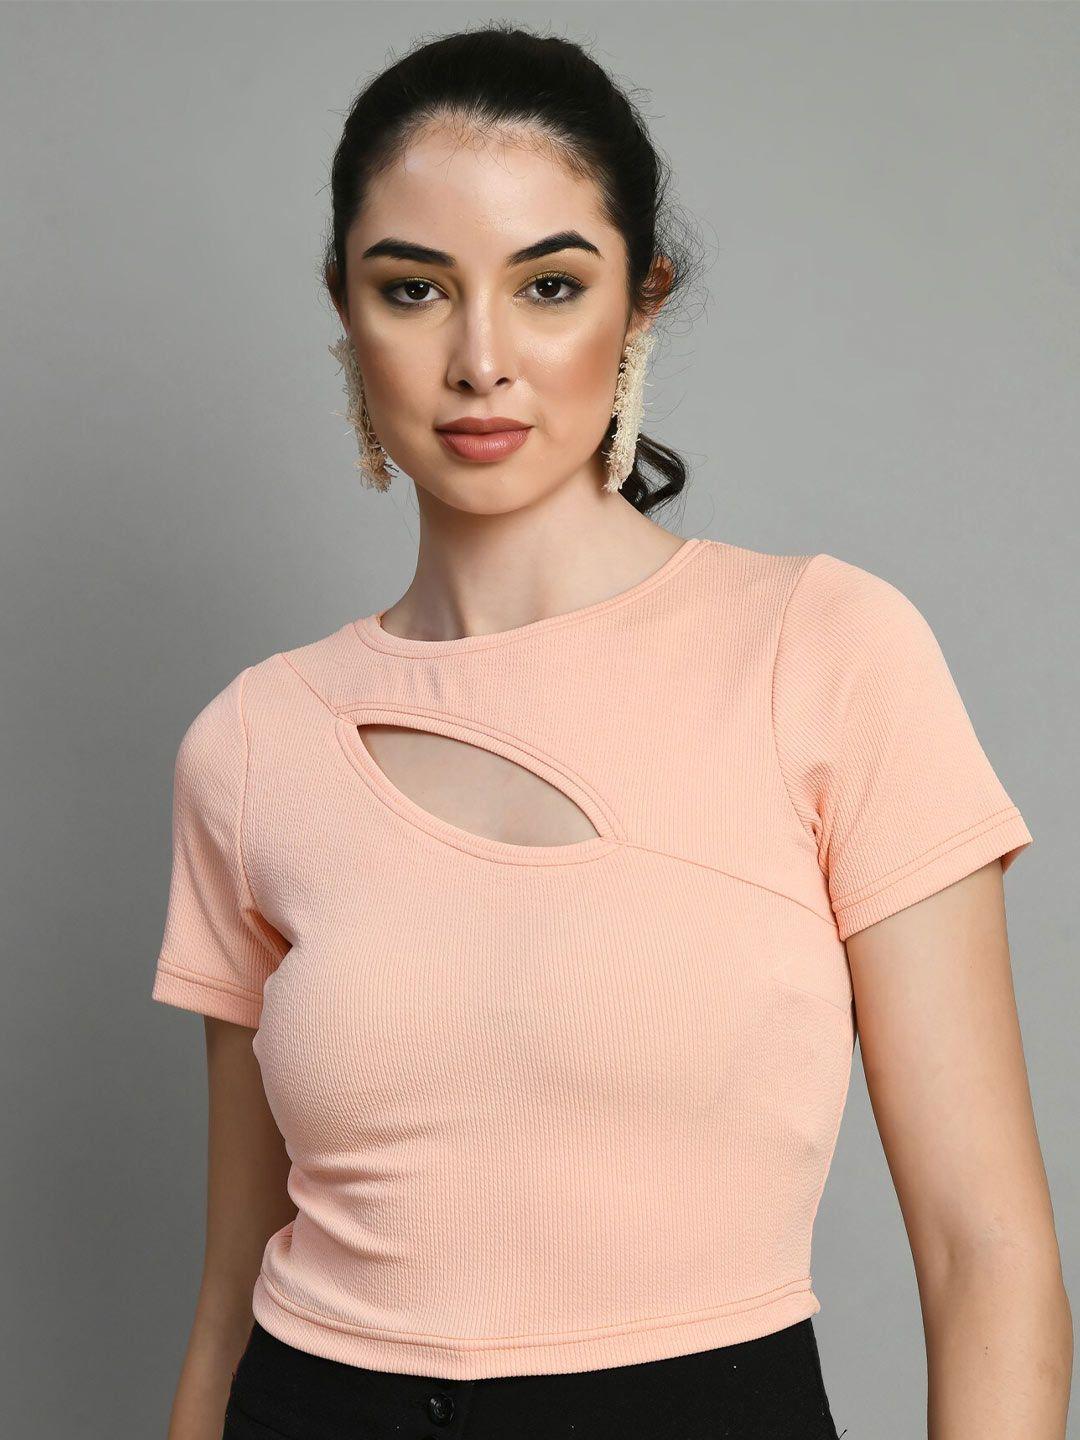 moshe cut out details top